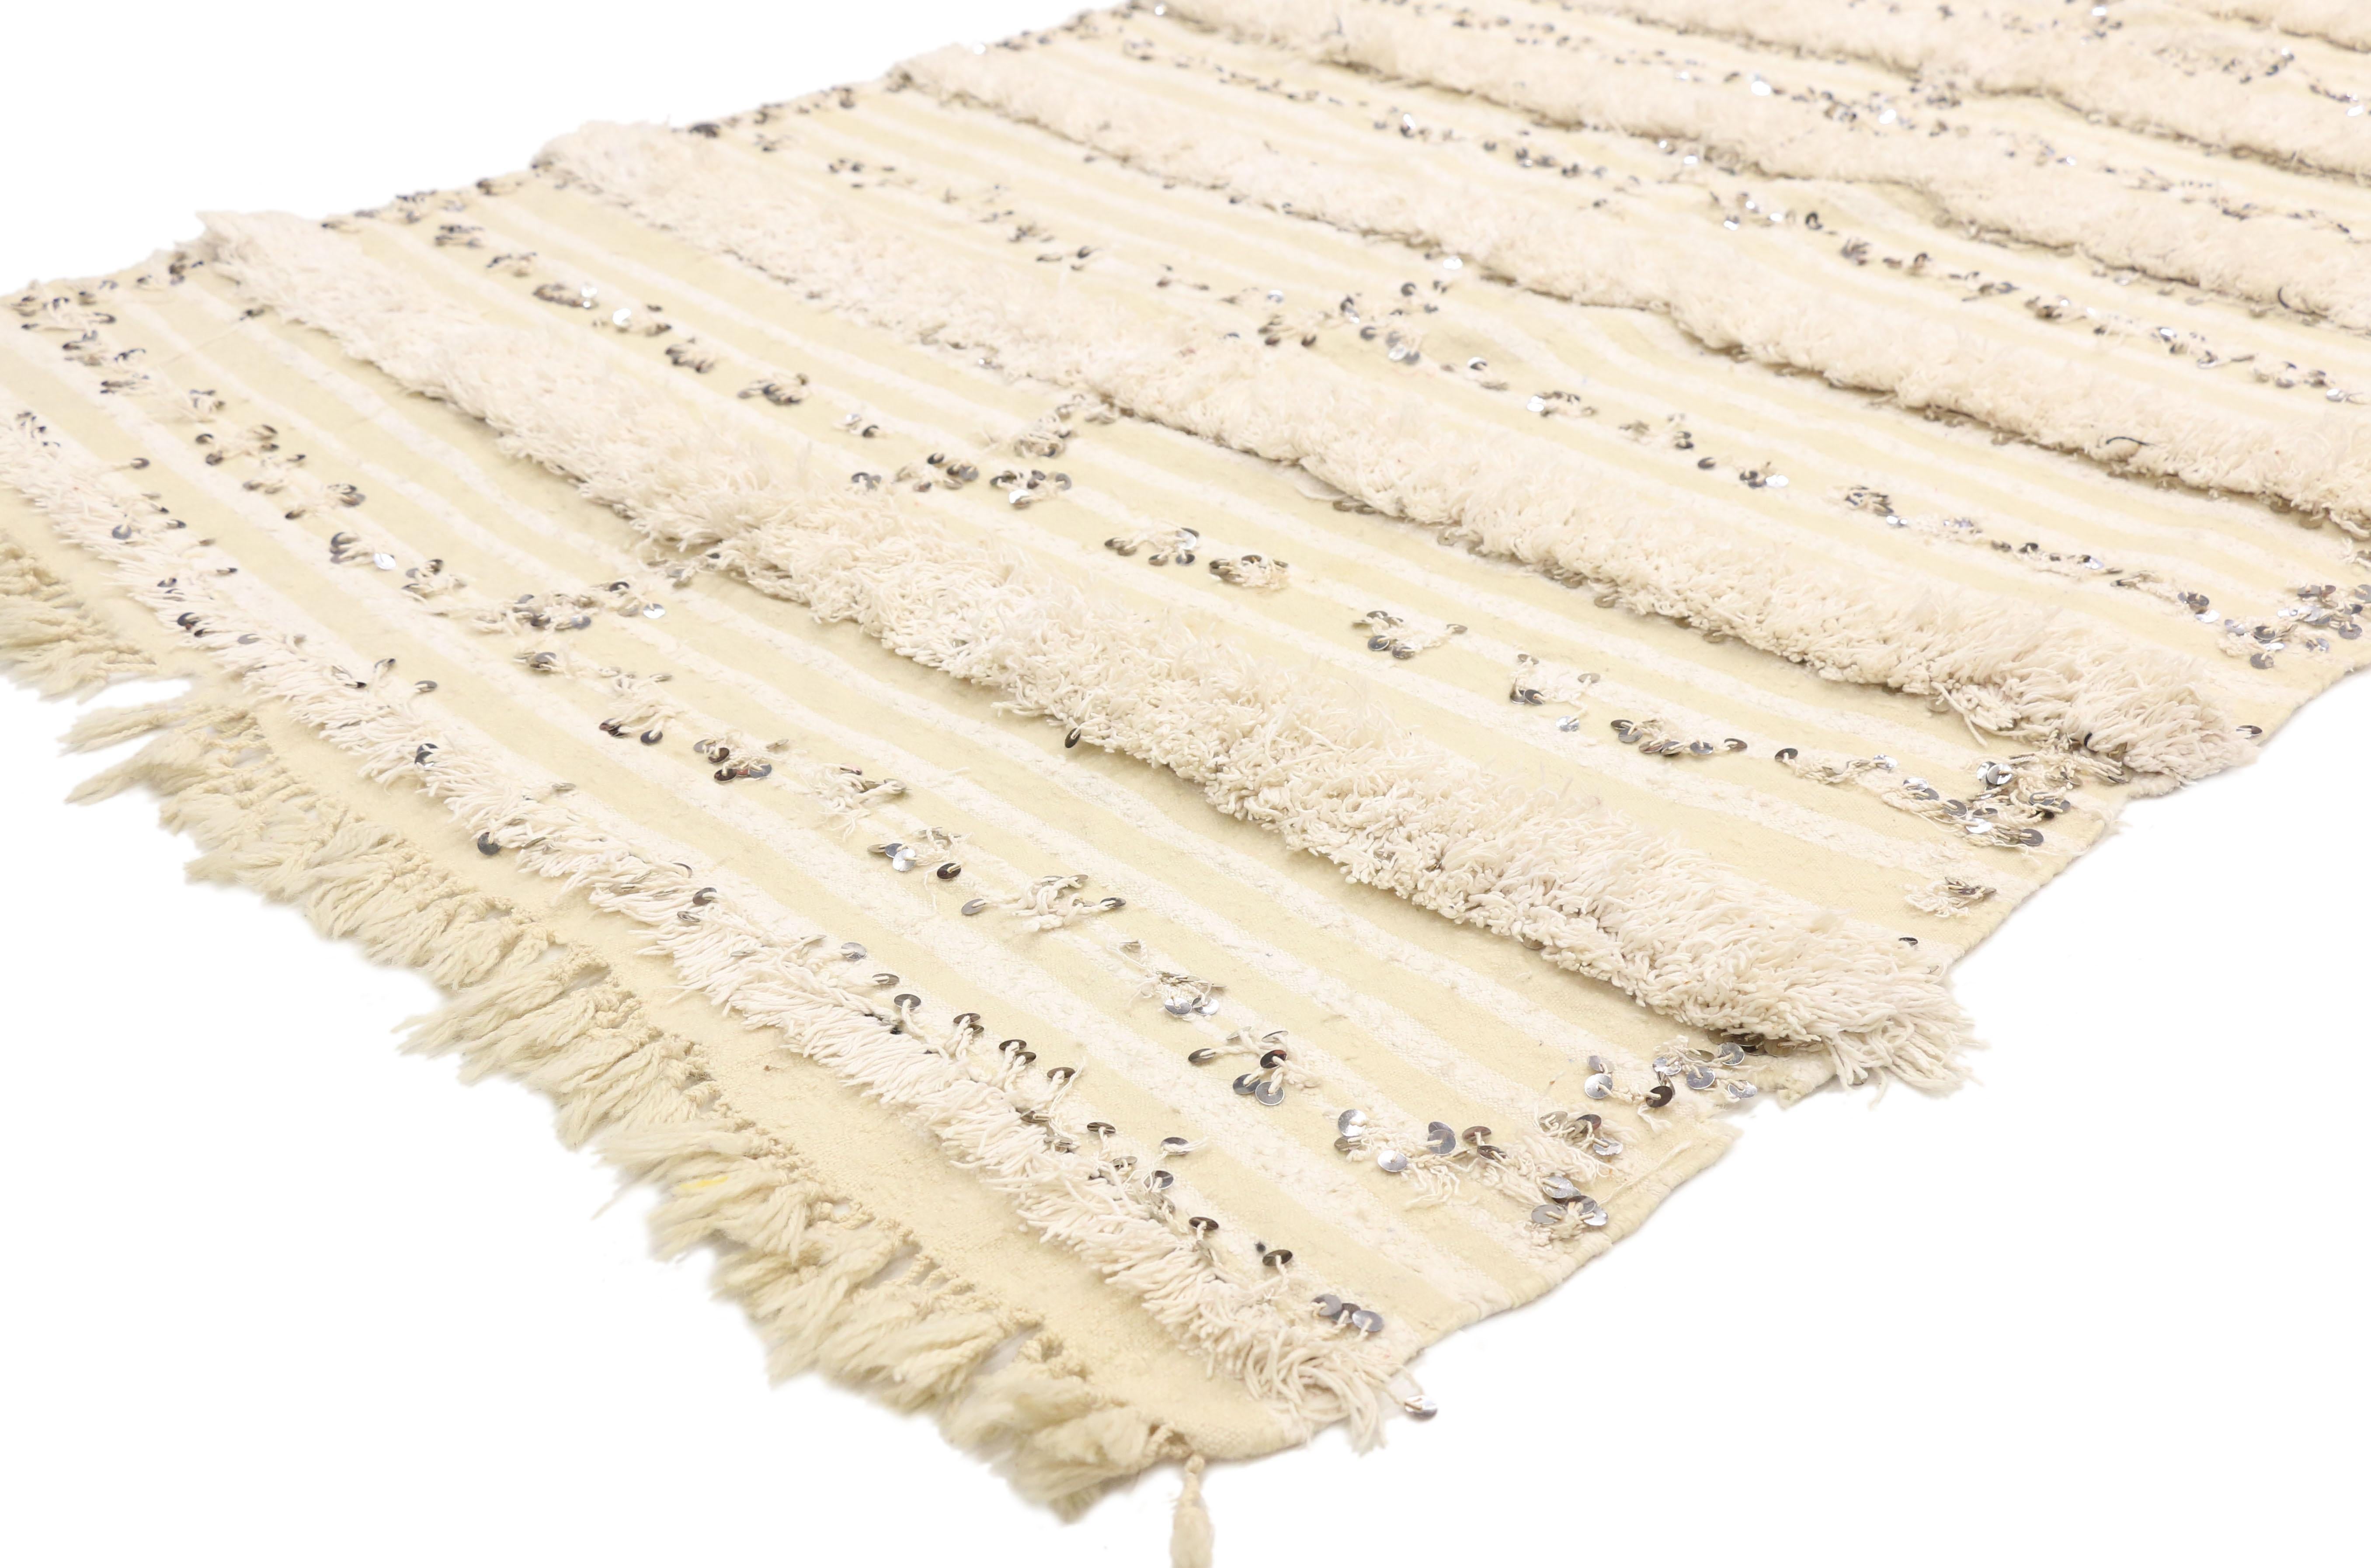 20830, vintage Moroccan wedding blanket, Berber Handira Tamizart. This handwoven wool vintage Moroccan Wedding Blanket also known as a Berber Handira features rows of fluffy fringe embellished with paillette sequins. The underside of this vintage